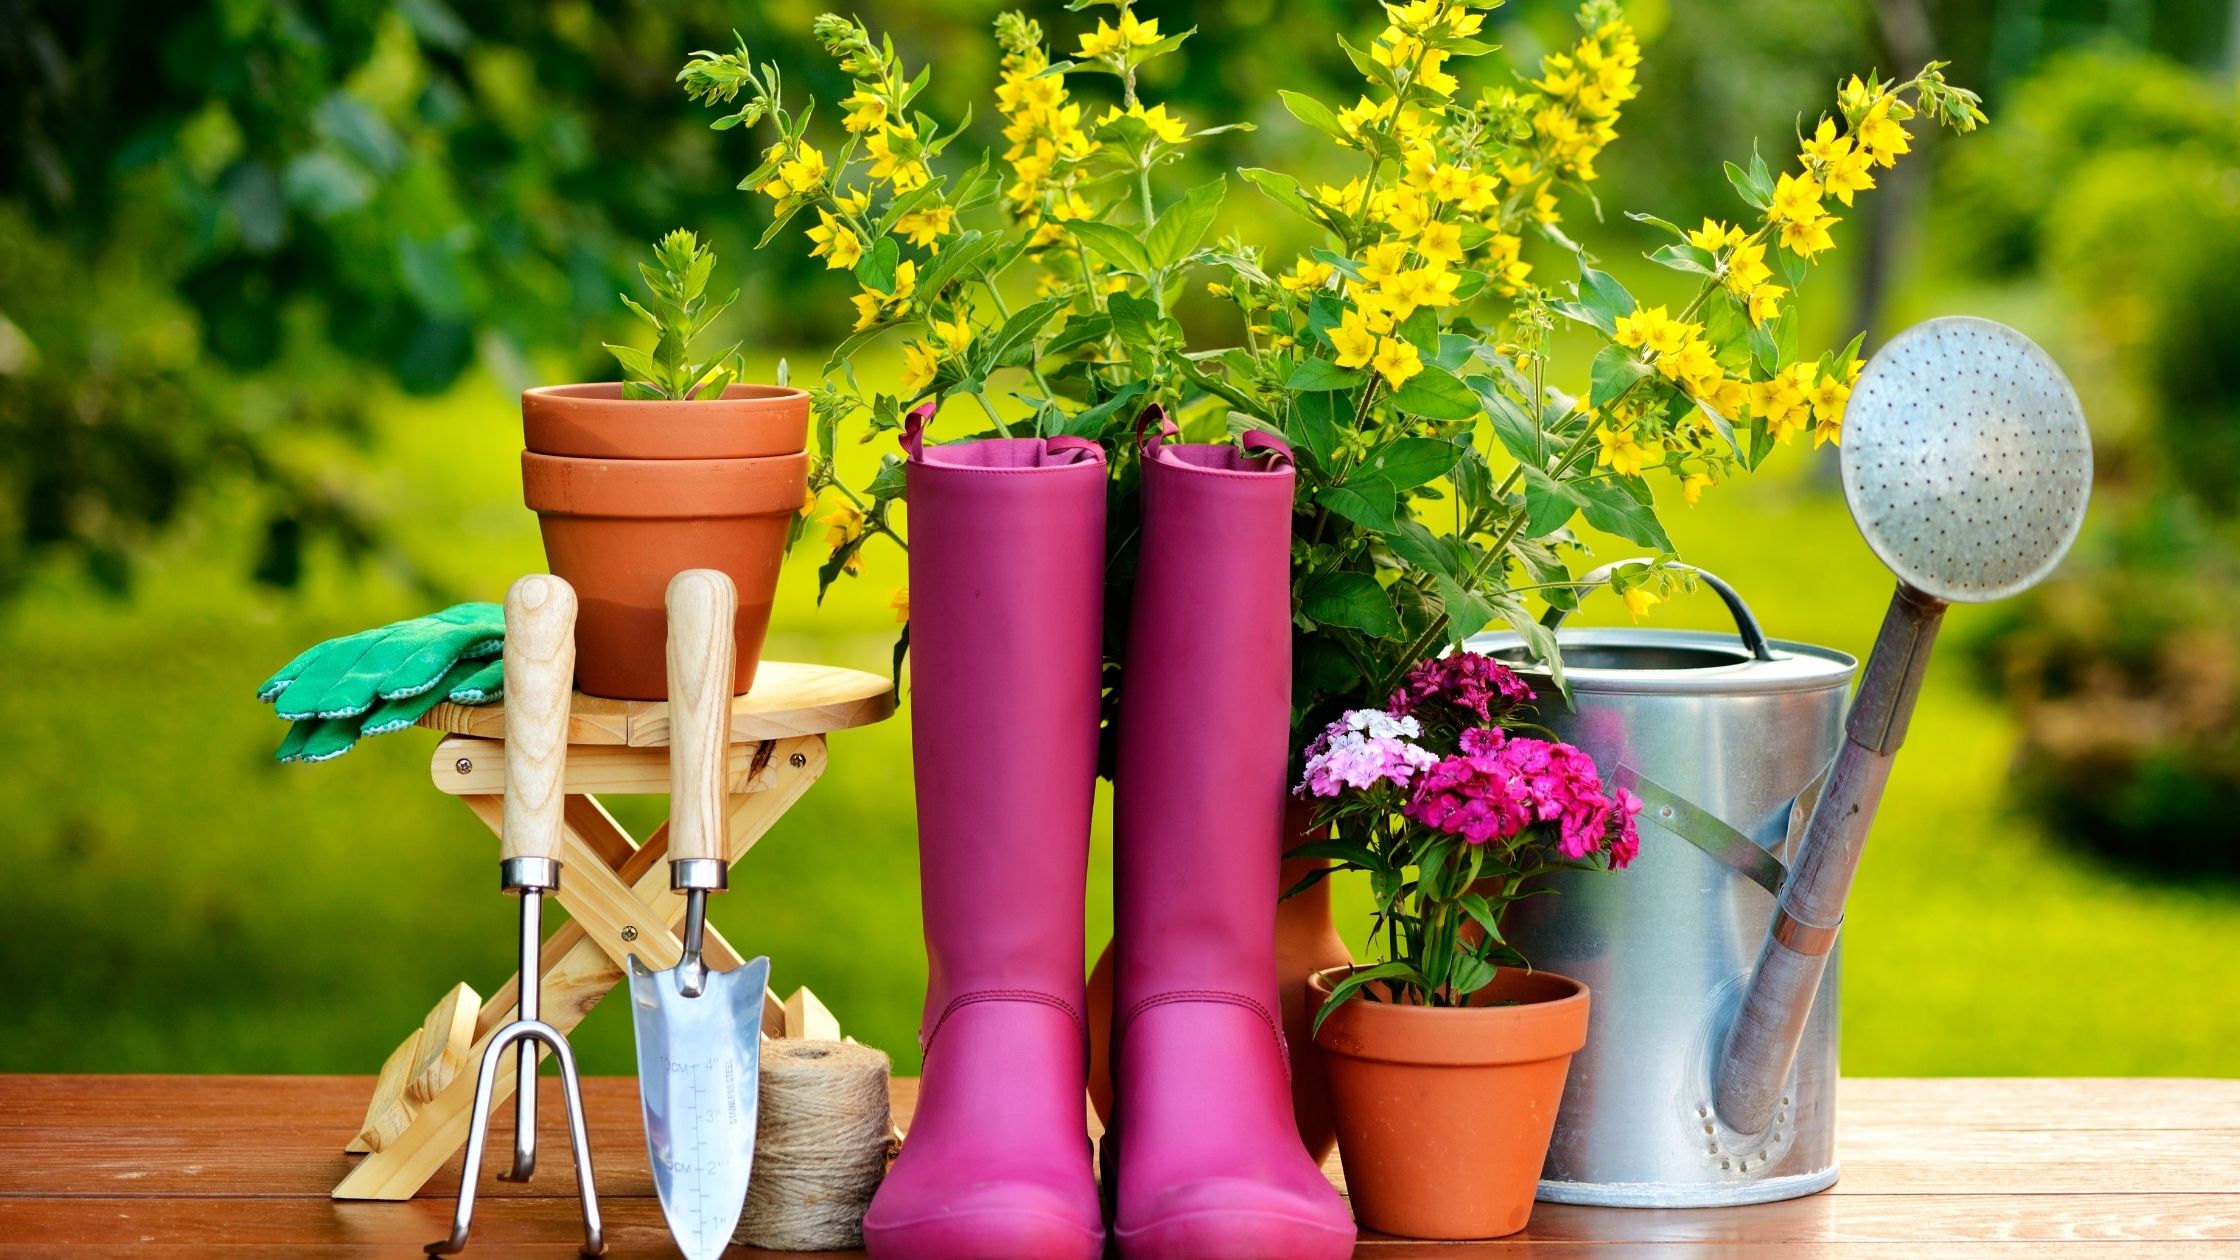 Offering gardening tools is an awesome gift idea for senior women